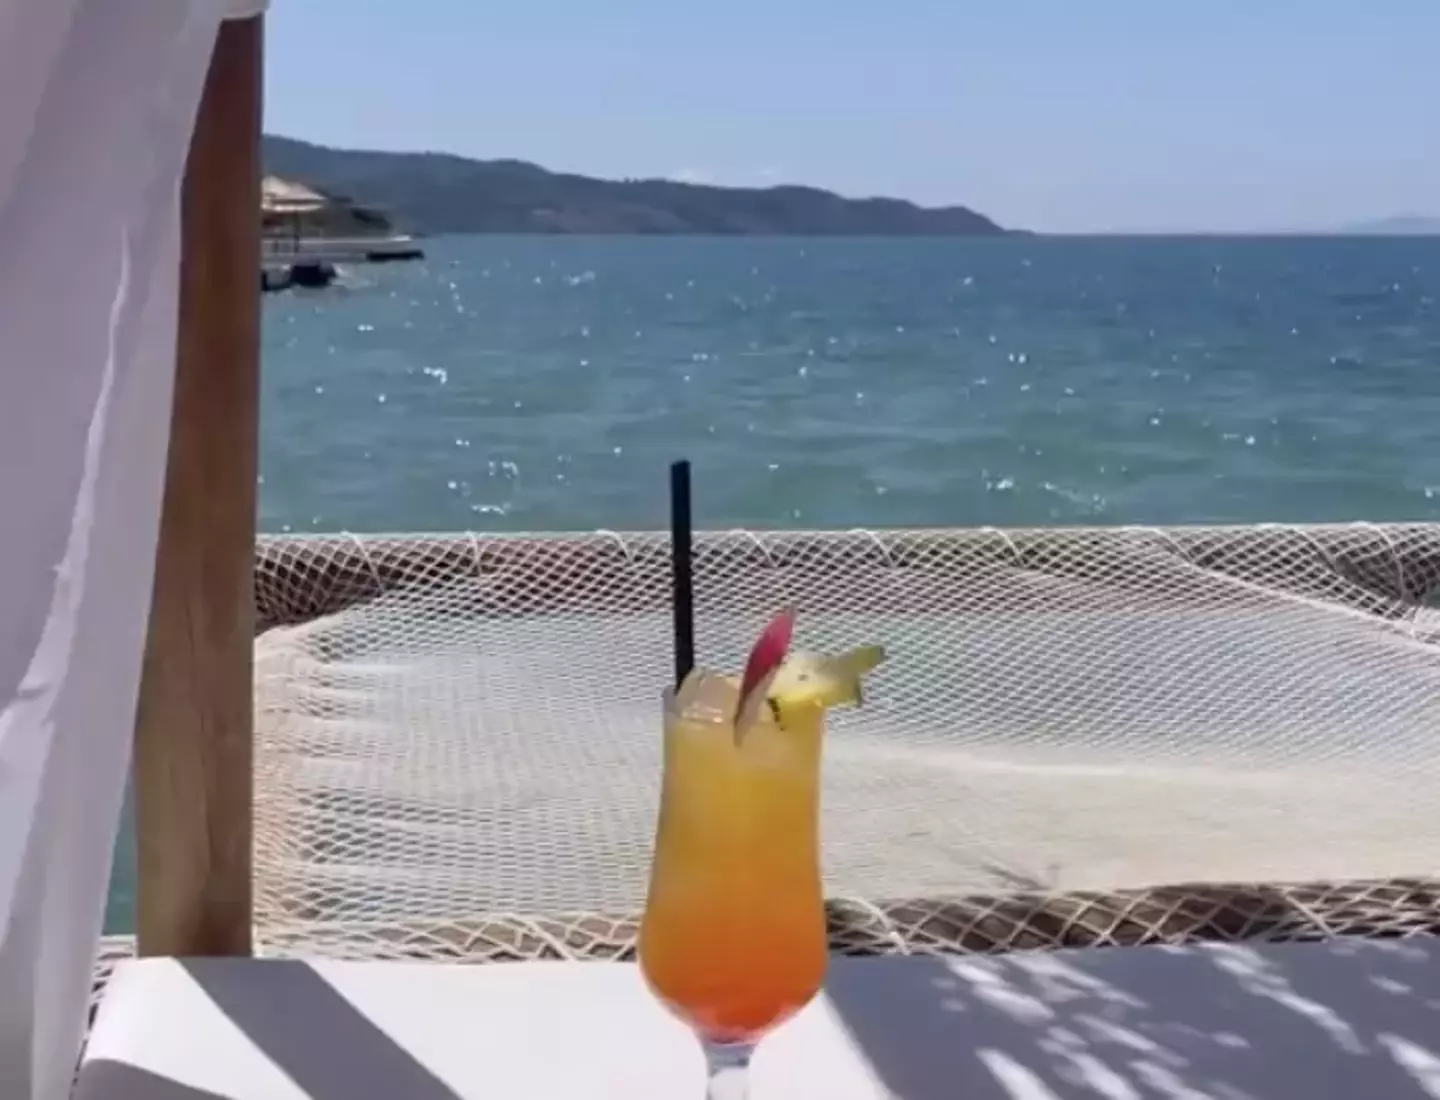 Cocktails by the sea, anyone?